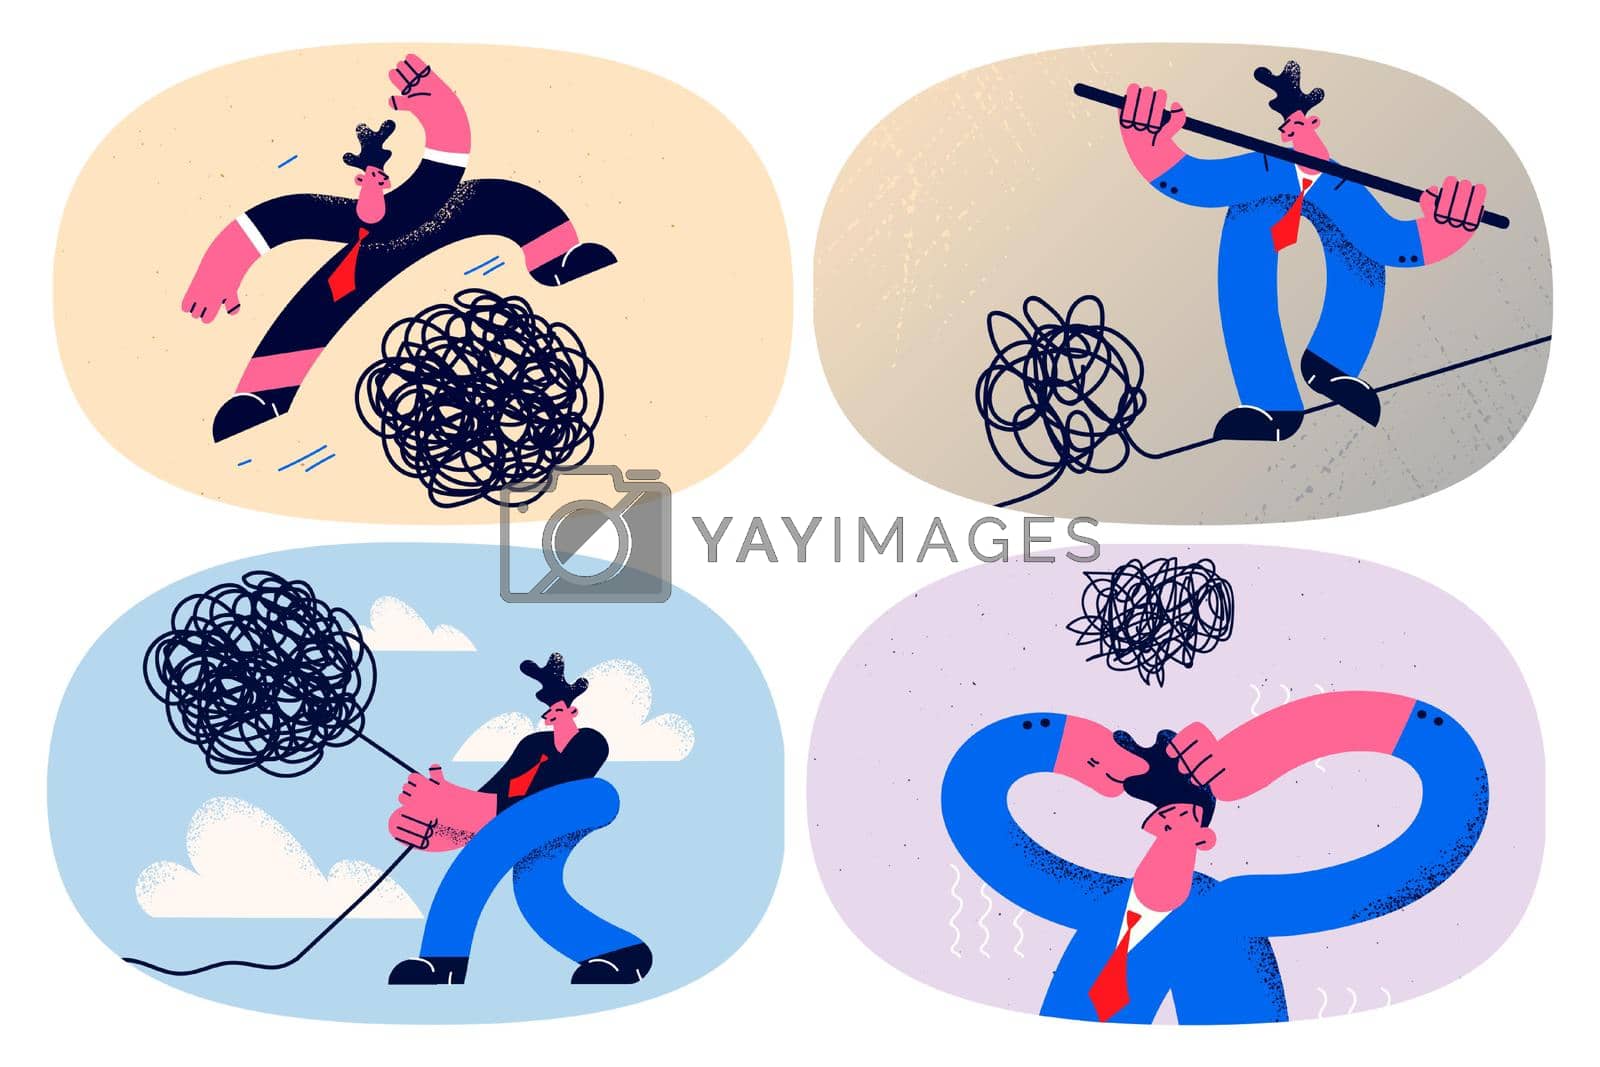 Set of businessman with bundled rope involved in difficult risky business deal. Businesspeople find look for solution risk for career or goal achievement. Challenge concept. Vector illustration.